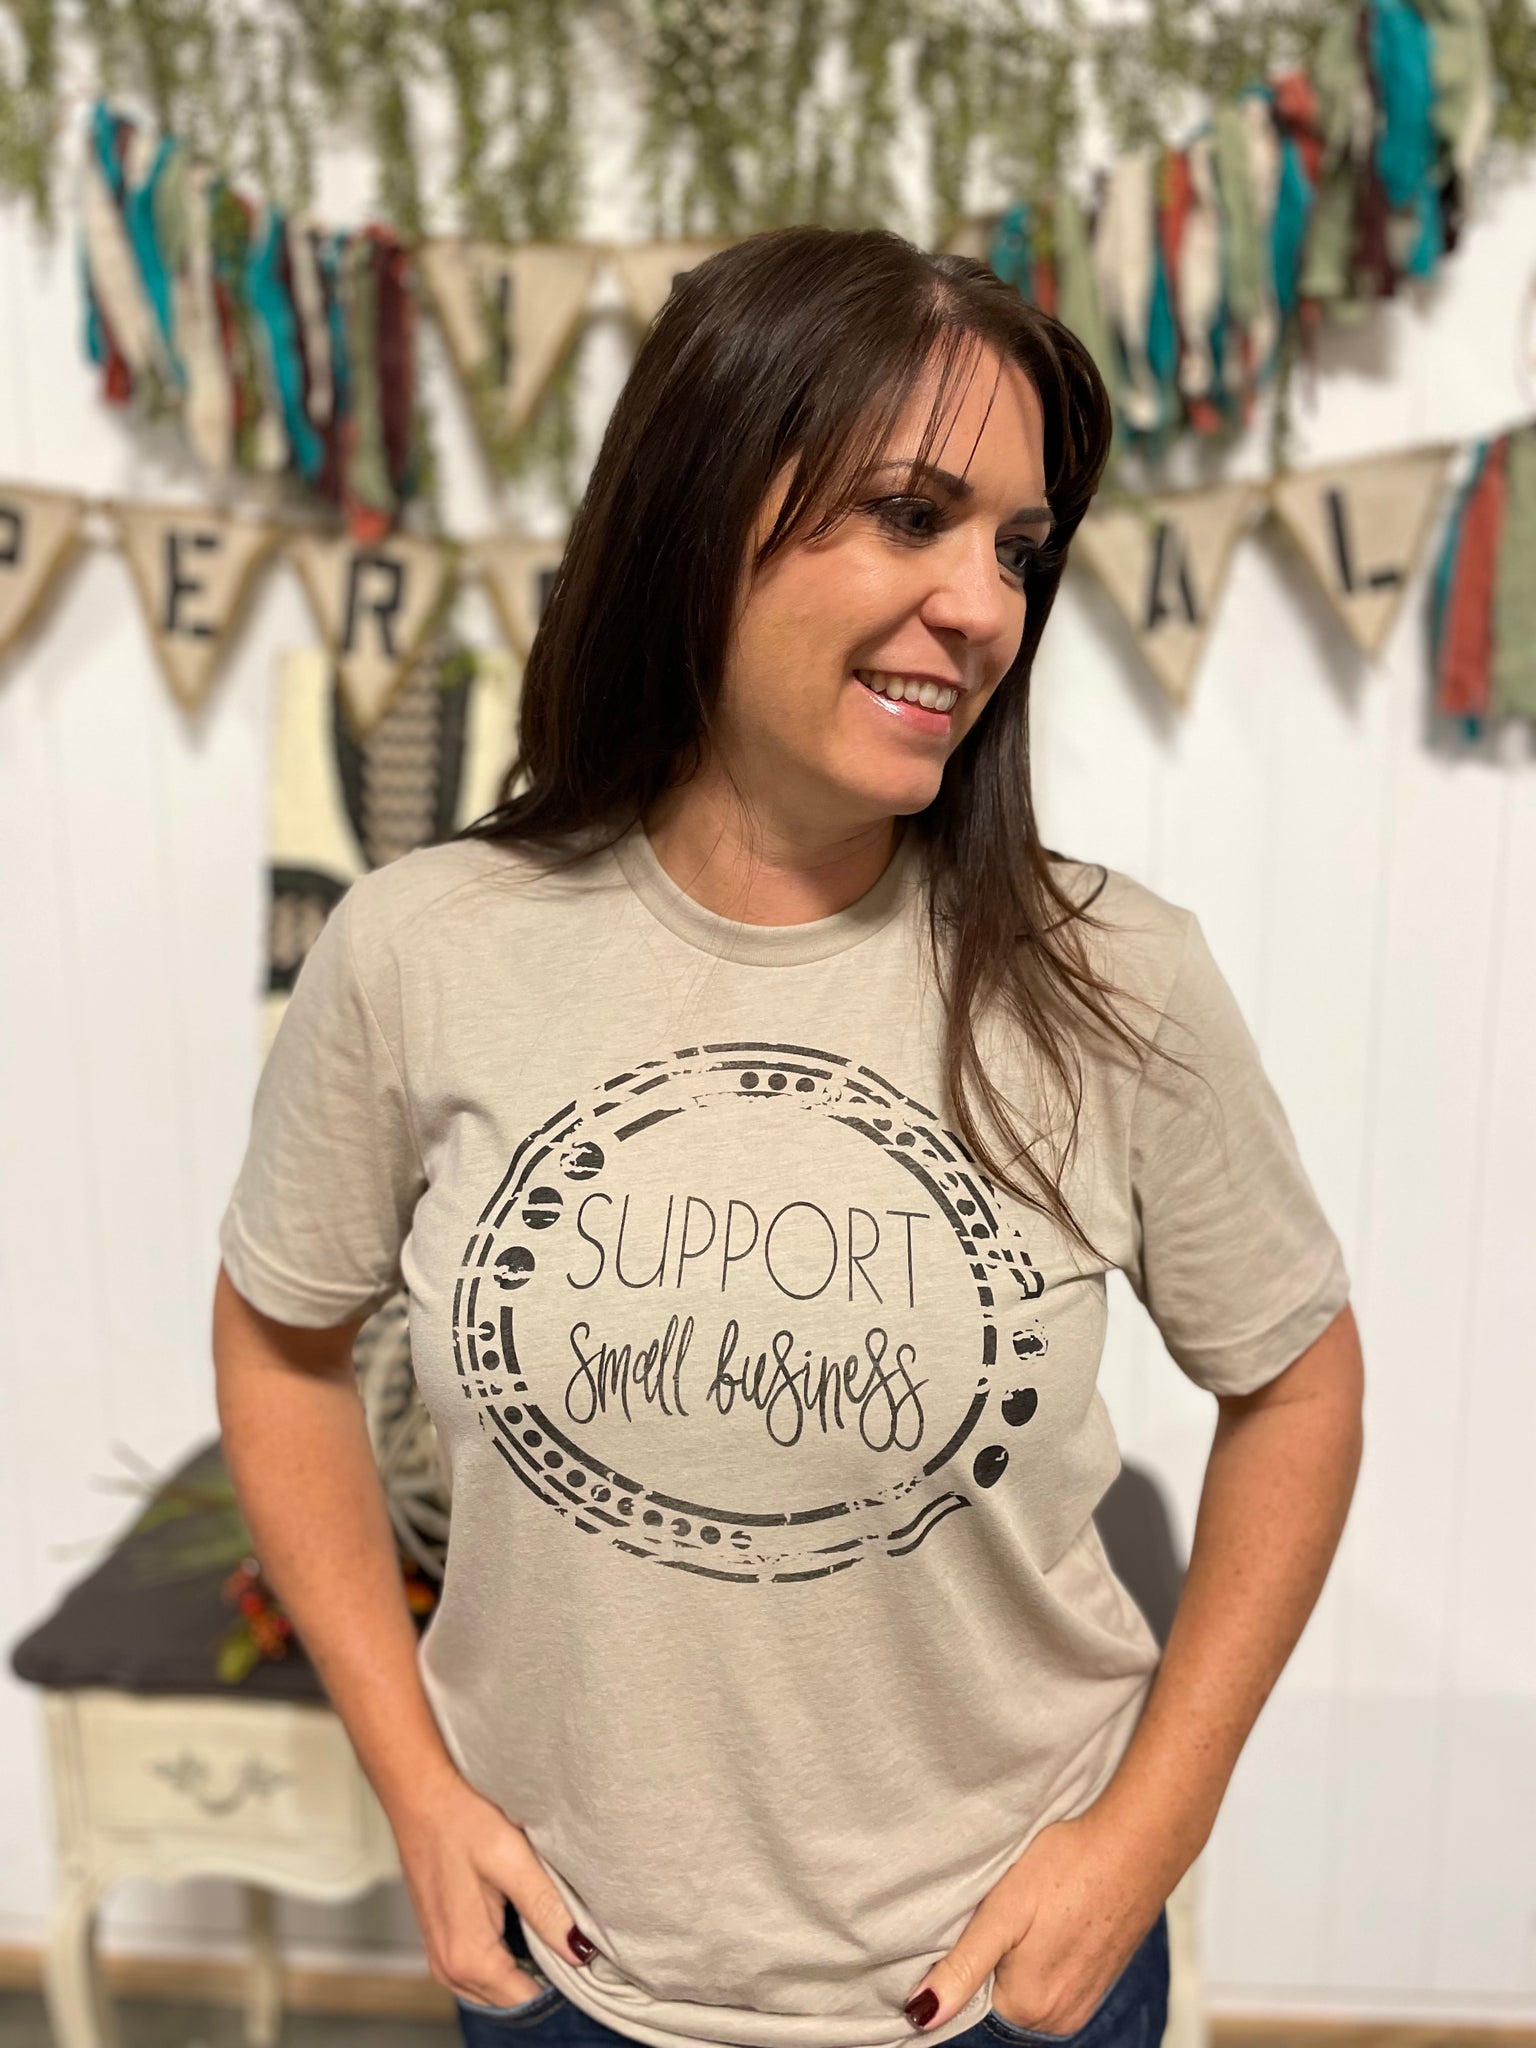 Support Small business tshirt